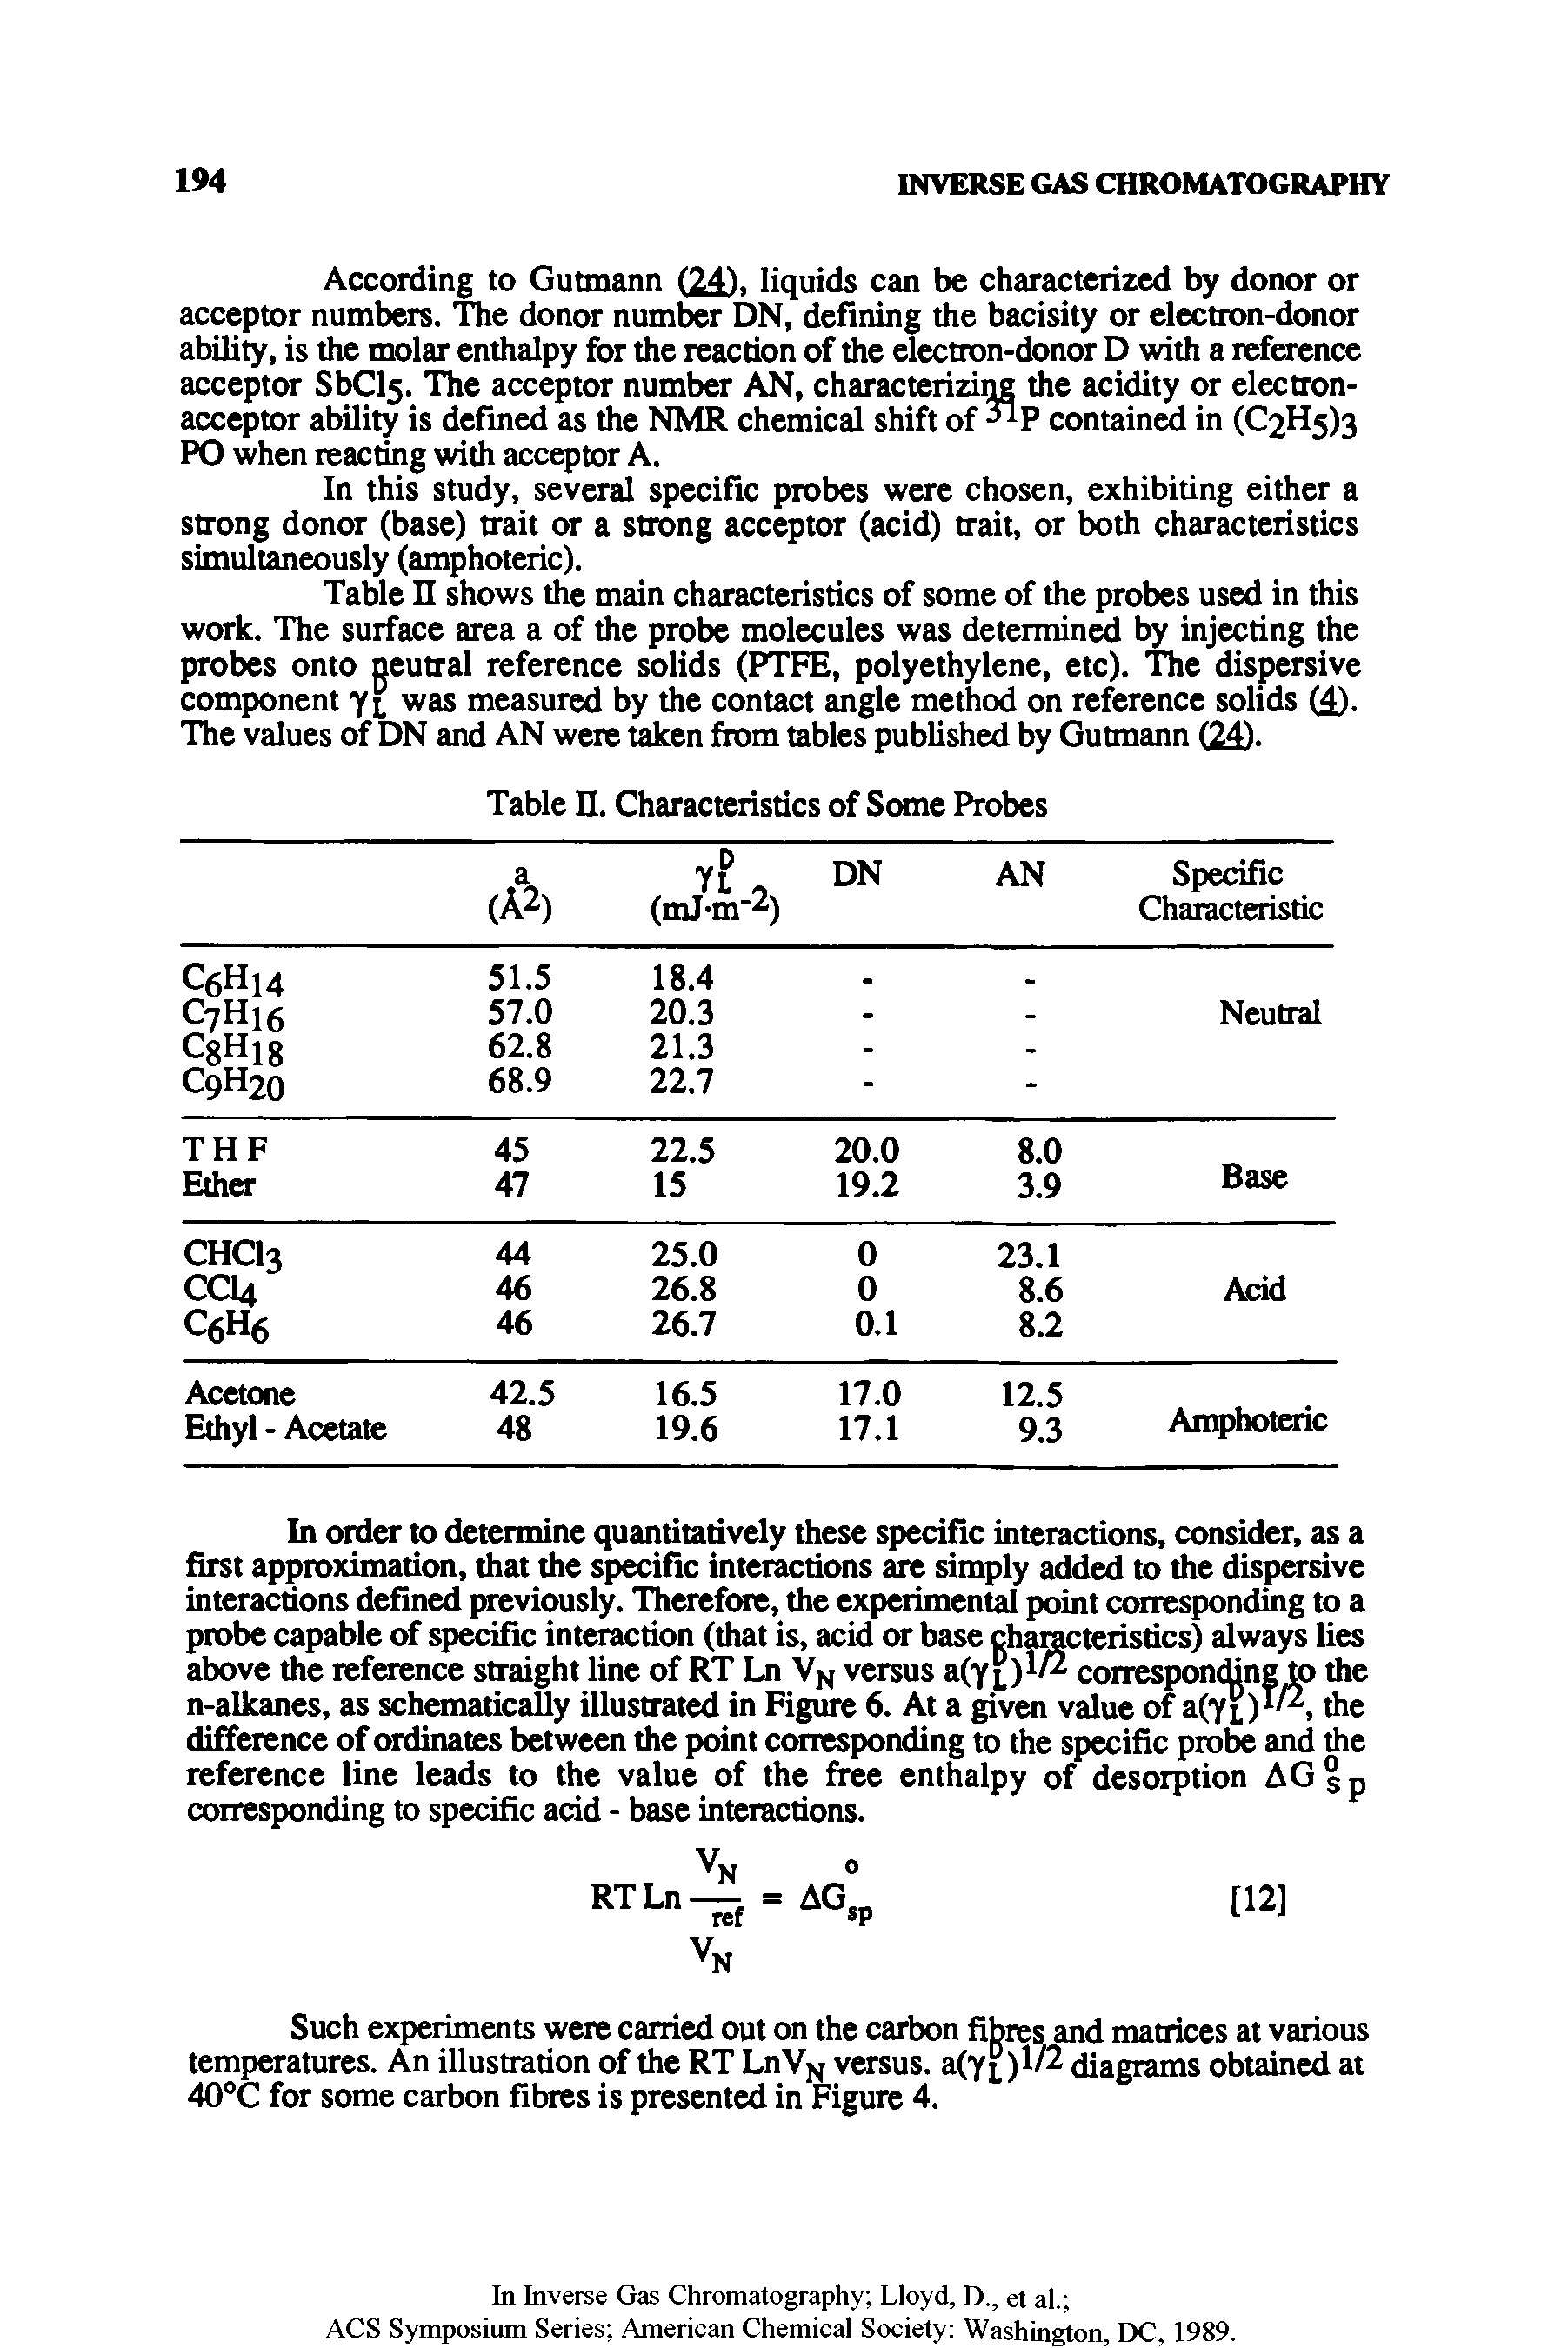 Table II shows the main characteristics of some of the probes used in this work. The surface area a of the probe molecules was determined by injecting the probes onto neutral reference solids (PTFE, polyethylene, etc). The dispersive component Yl was measured by the contact angle method on reference solids ( ). The values of DN and AN were taken from tables published by Gutmann (24).